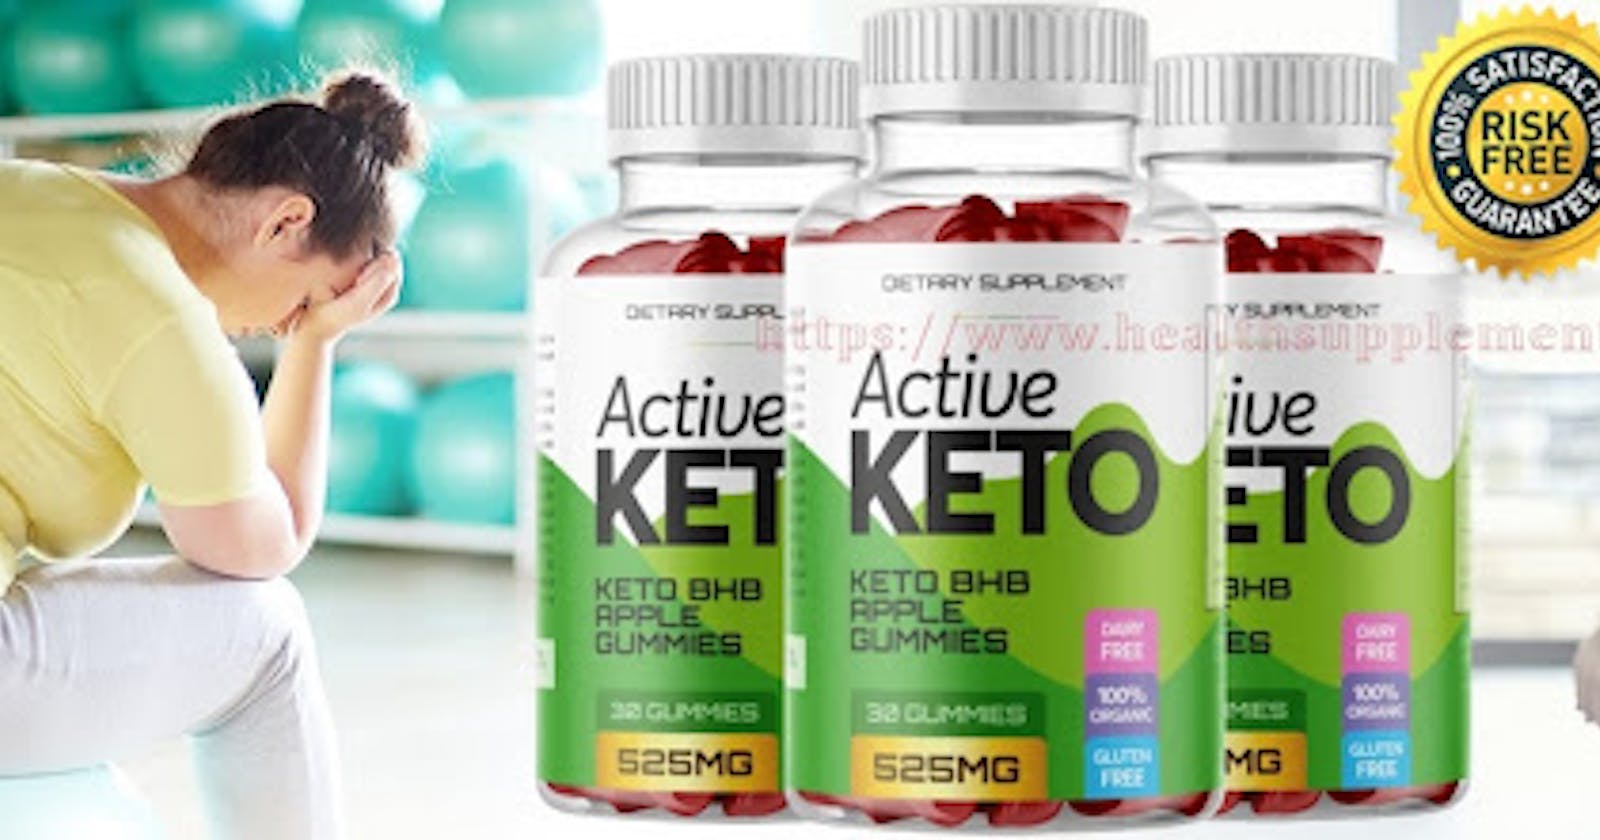 Full Body Health Keto ACV Gummies Shocking Benefits,price,offer and Ingredients [Avoid Fake Reviews]